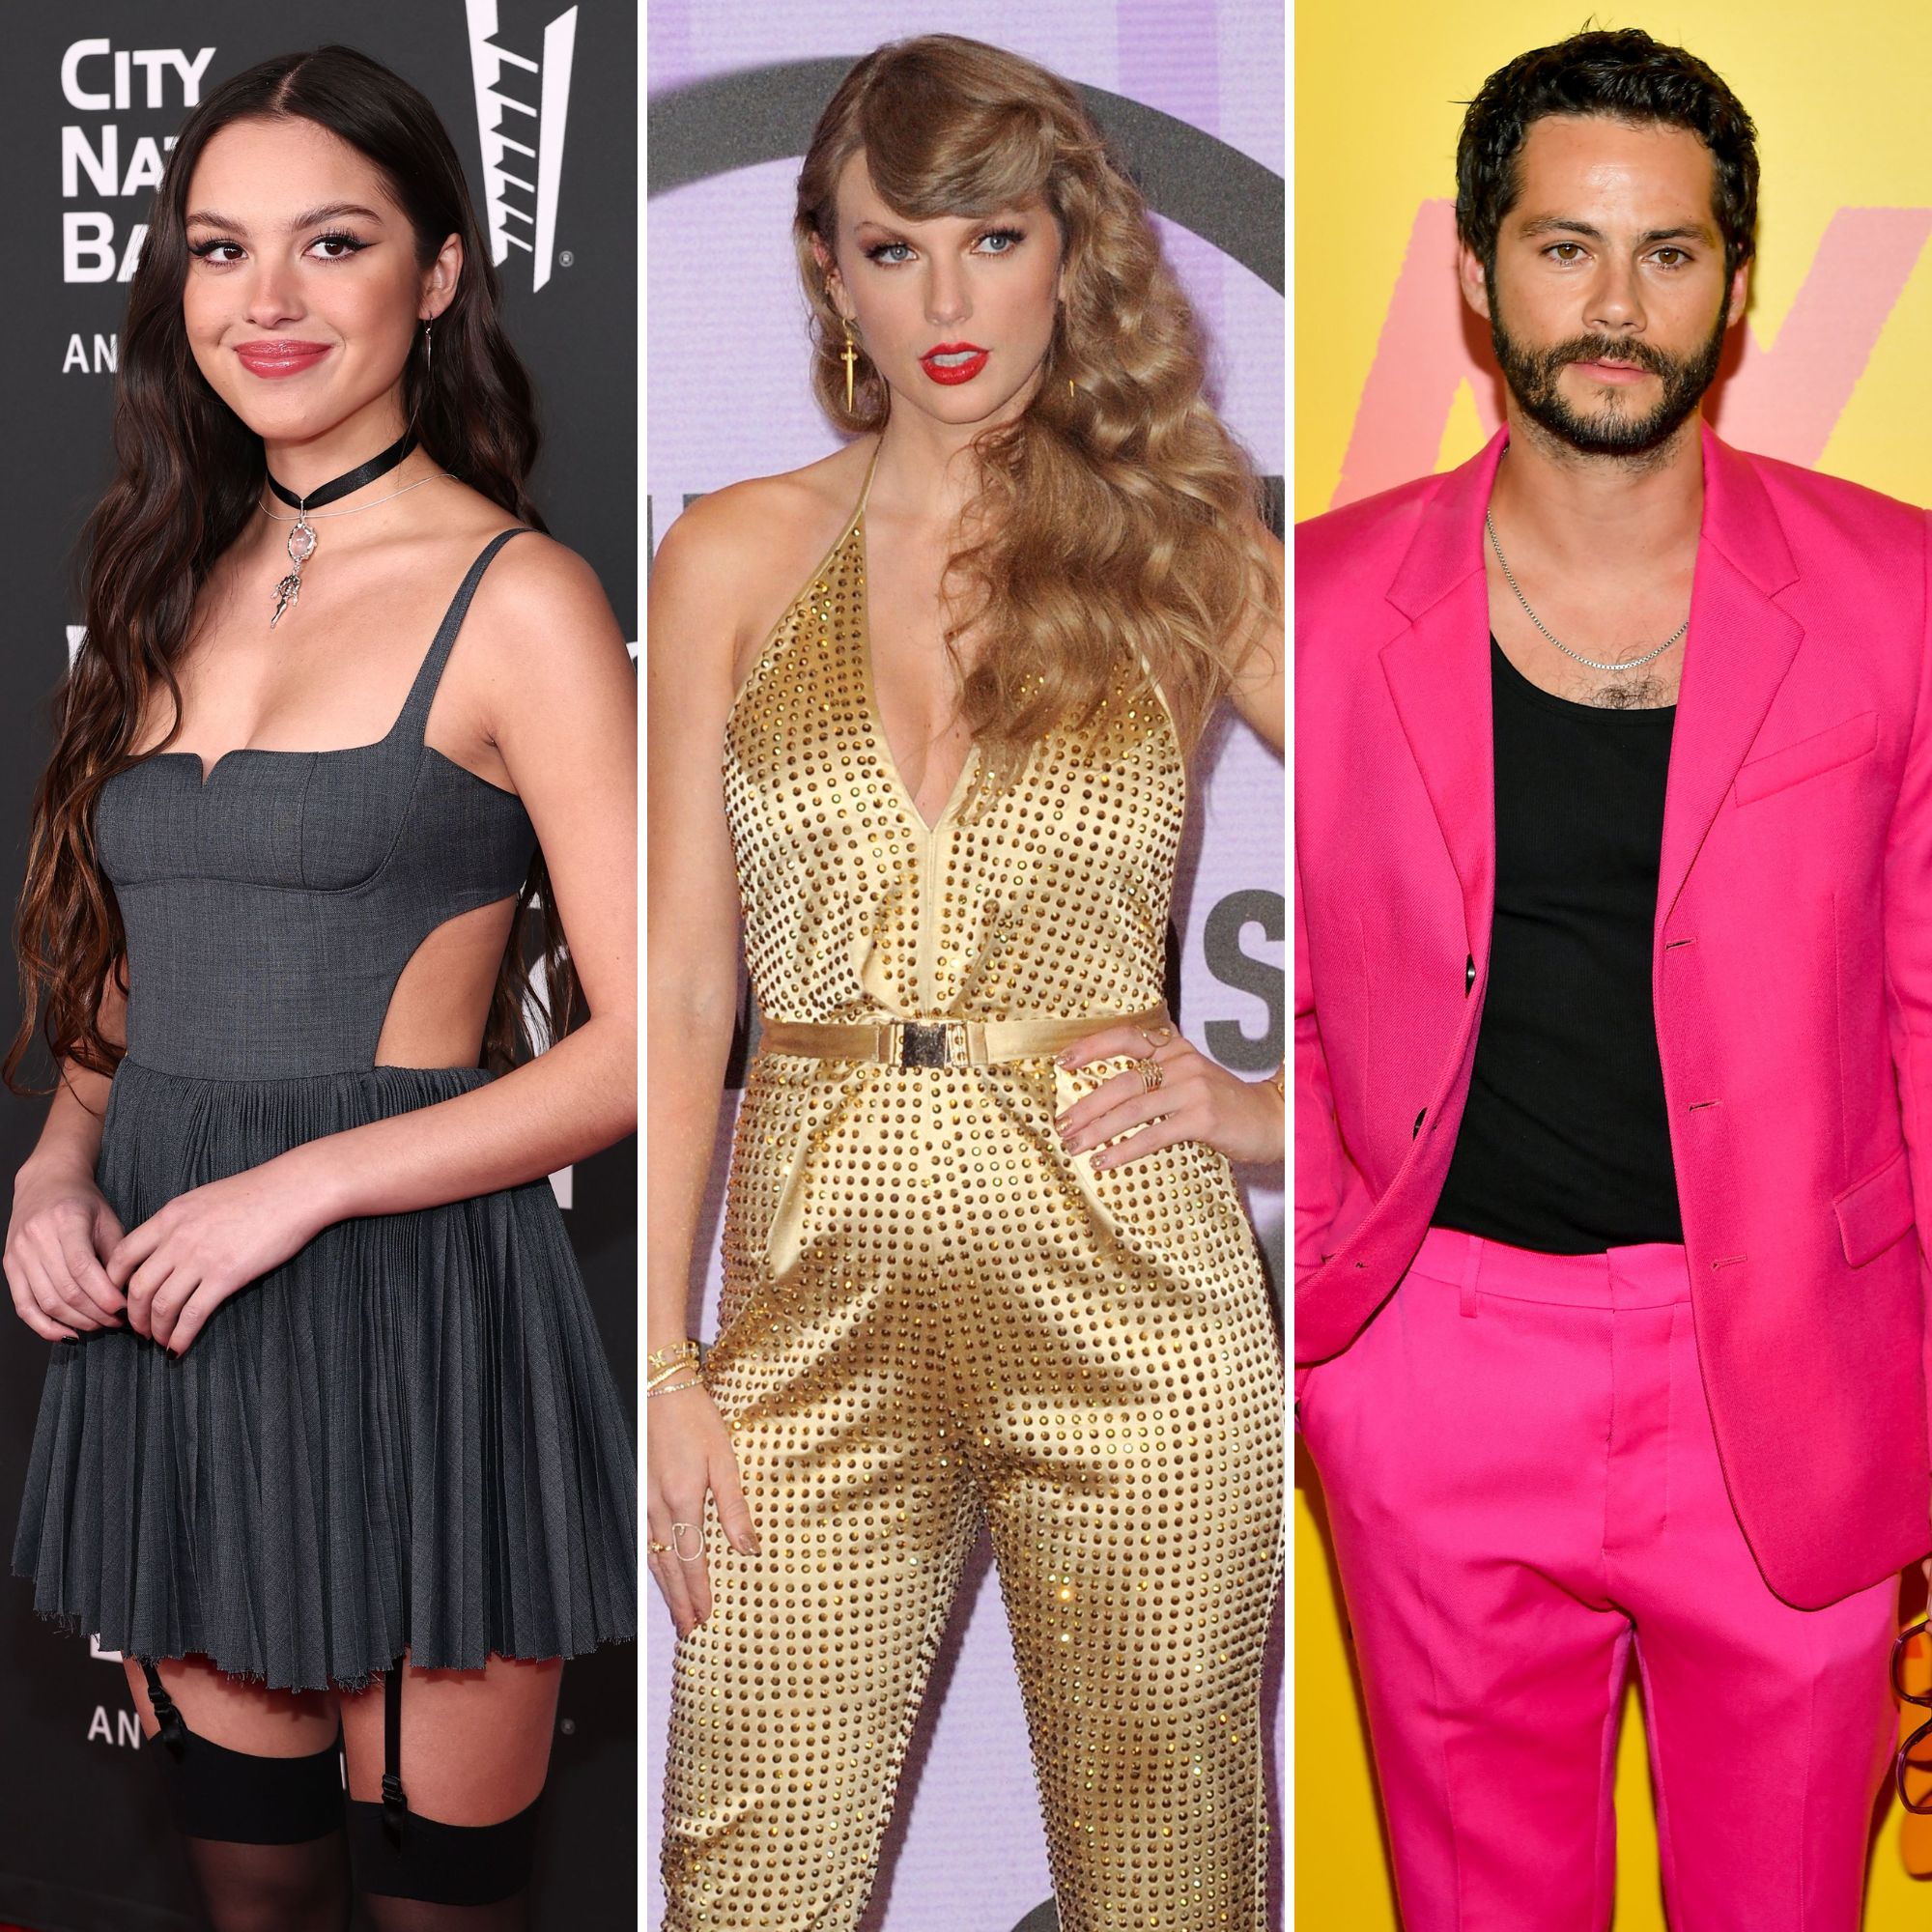 Taylor Swift's Song Lyrics: Celebrities Featured in Her Songs